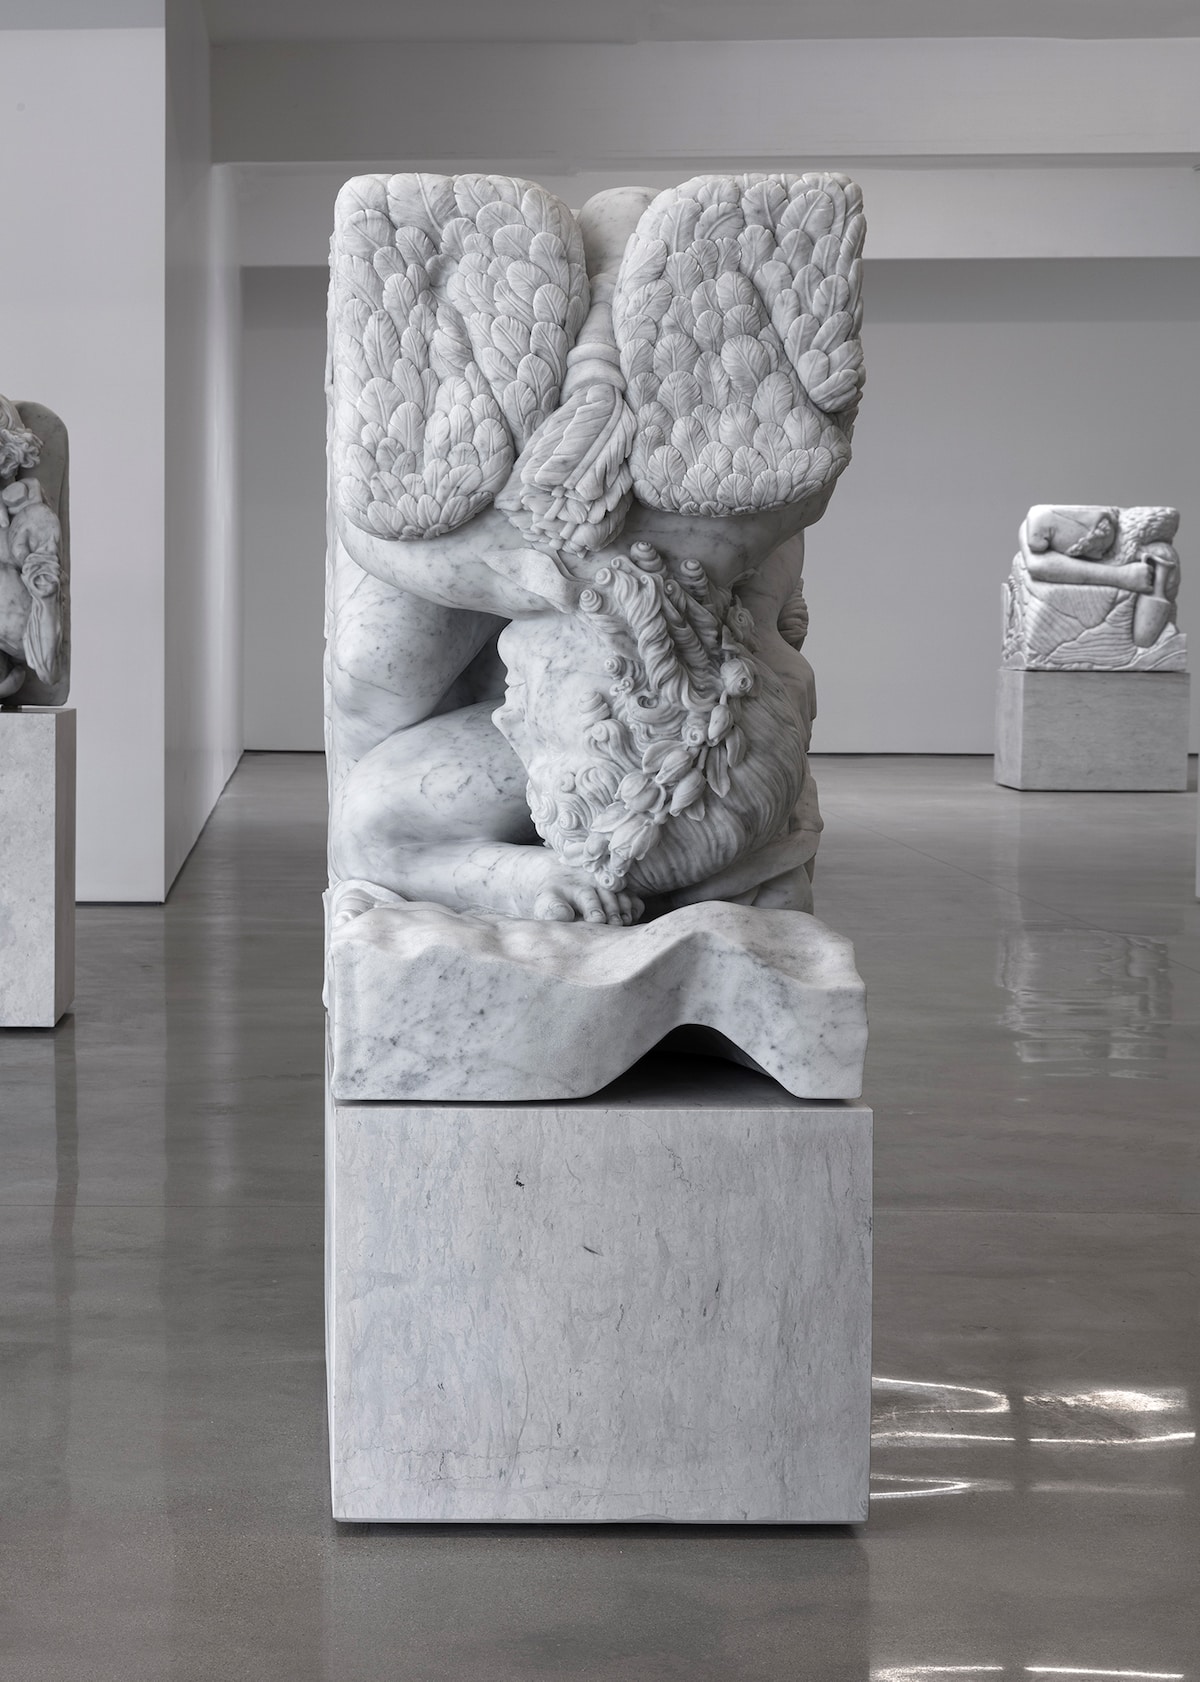 Artist Adam Parker Smith Compresses Classical Sculptures Into Small Marble Cubes (8)